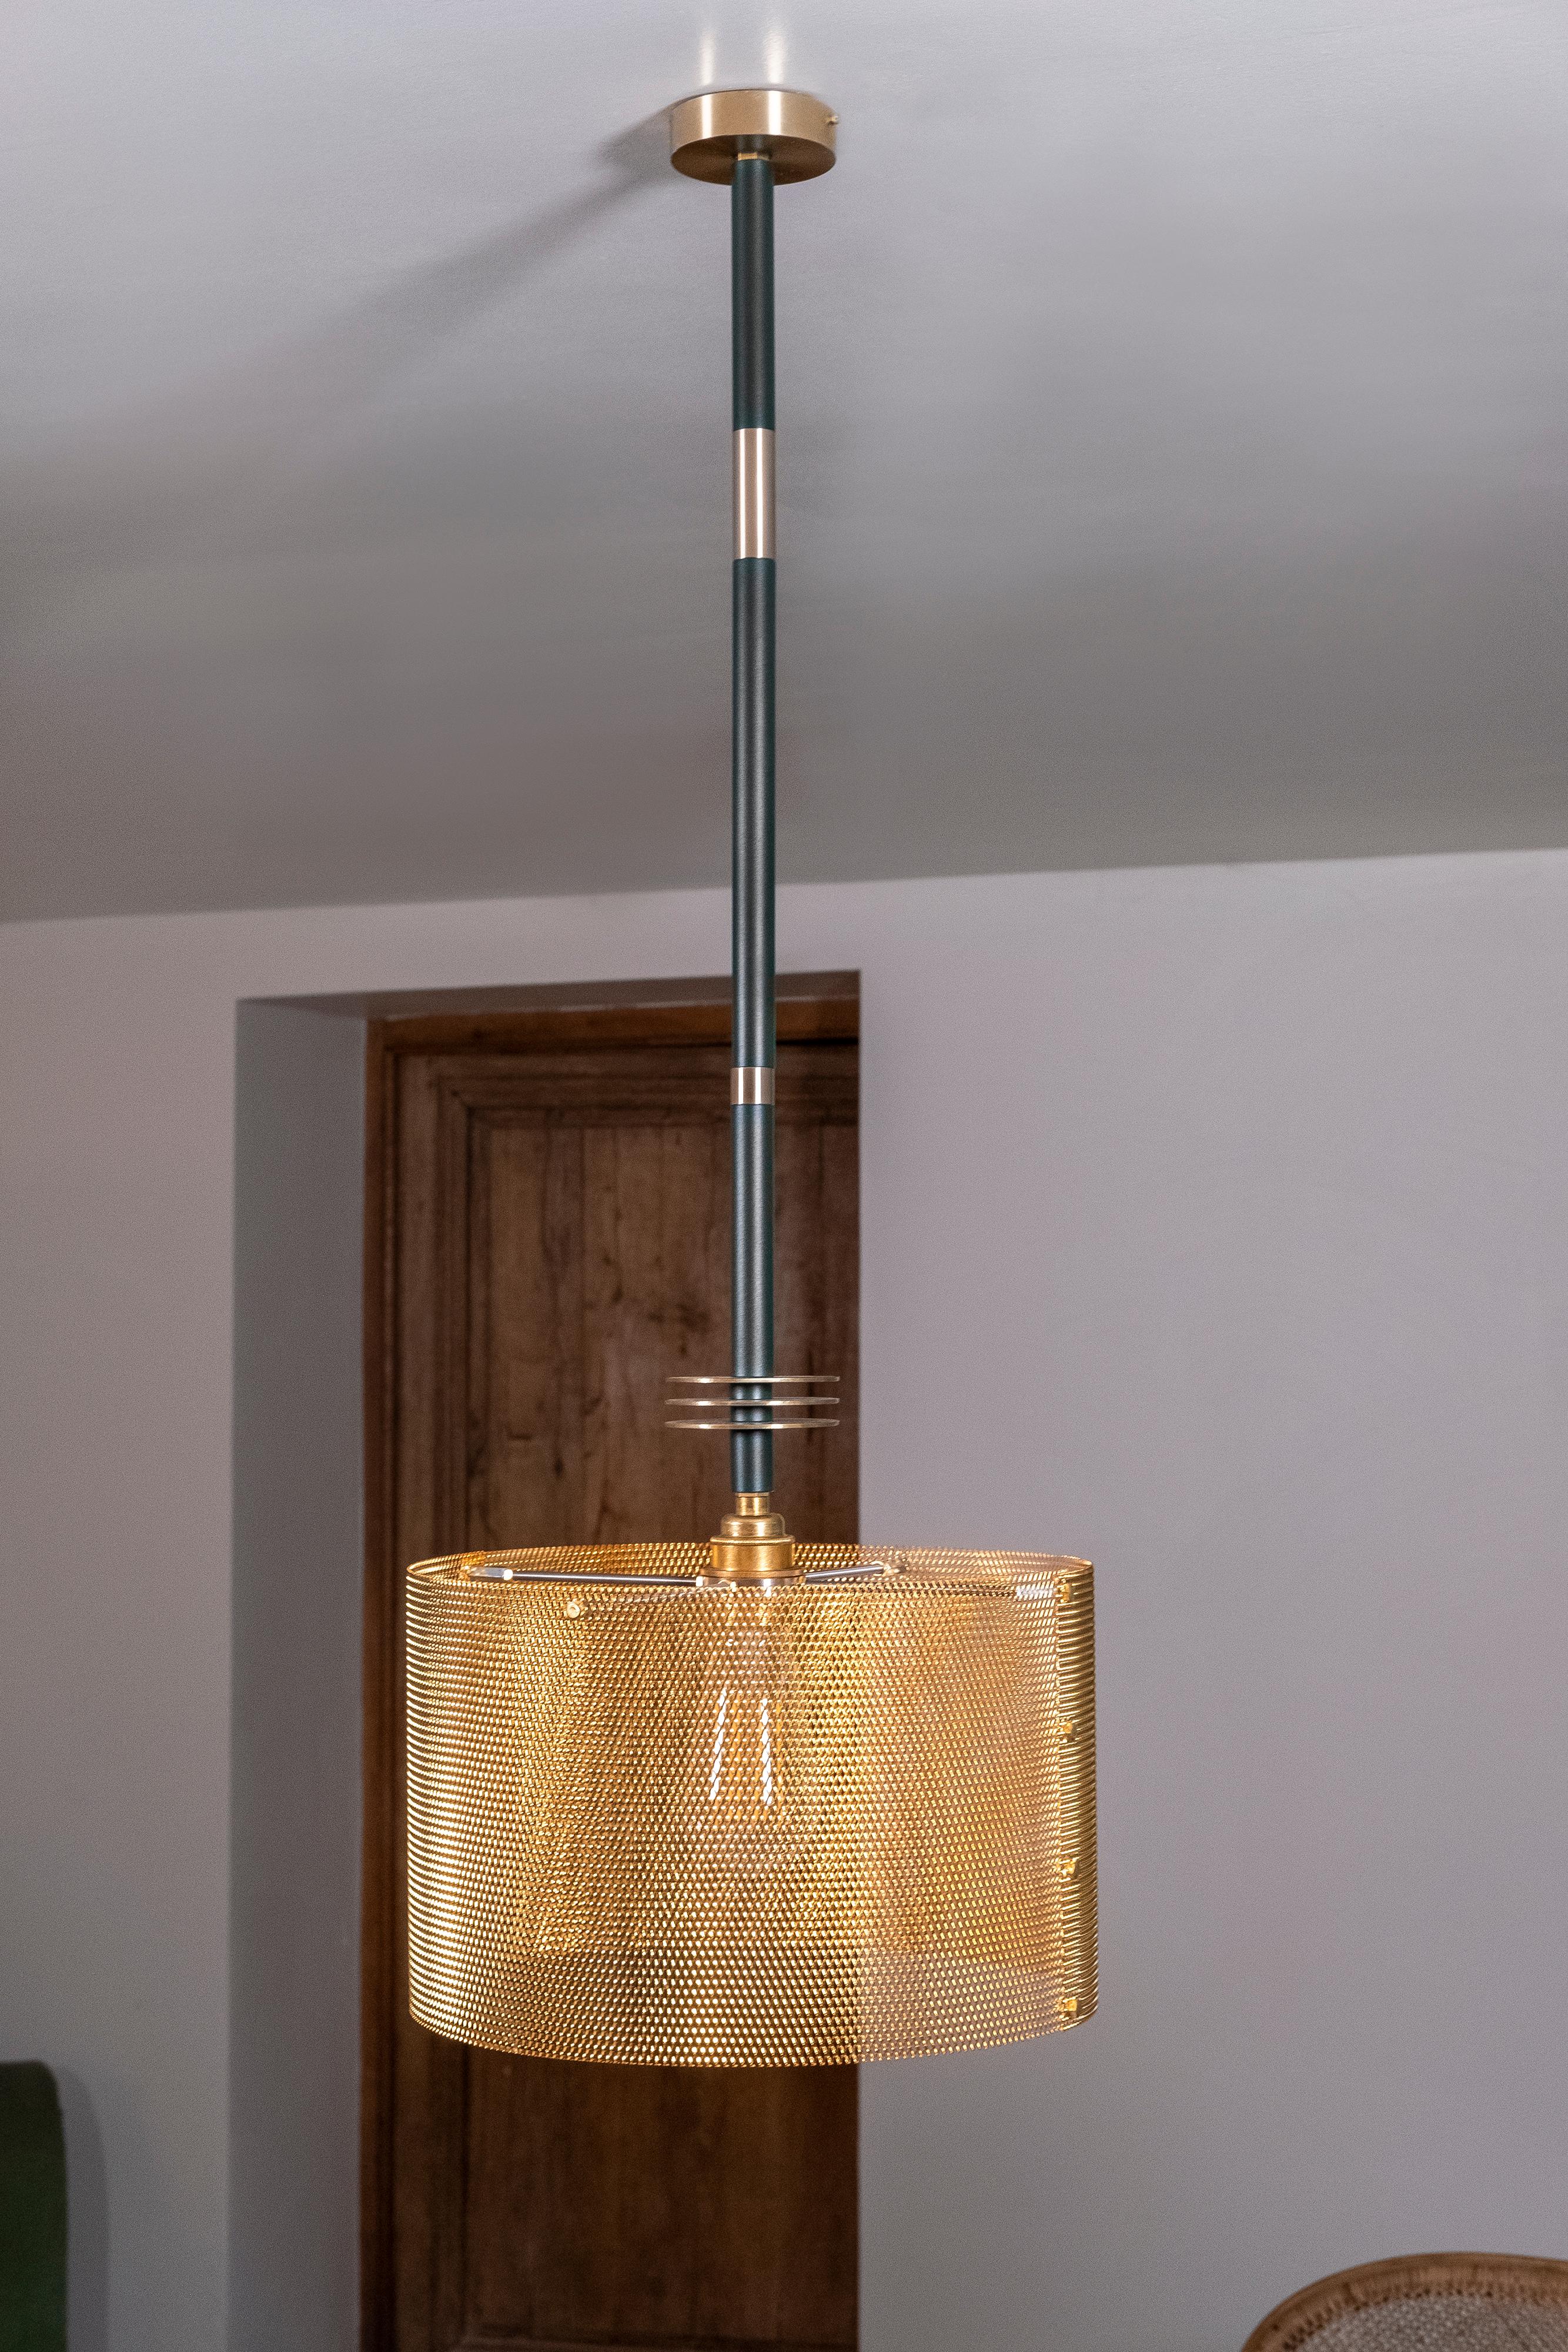 This Dédale chandelier fit with elegance in a contemporary interior, refined in its lines. 
The golden expanded metal shade diffuses an intimate light. They will be perfect for a dinner table or a bar.
Comforting lights, with character.

Chandelier